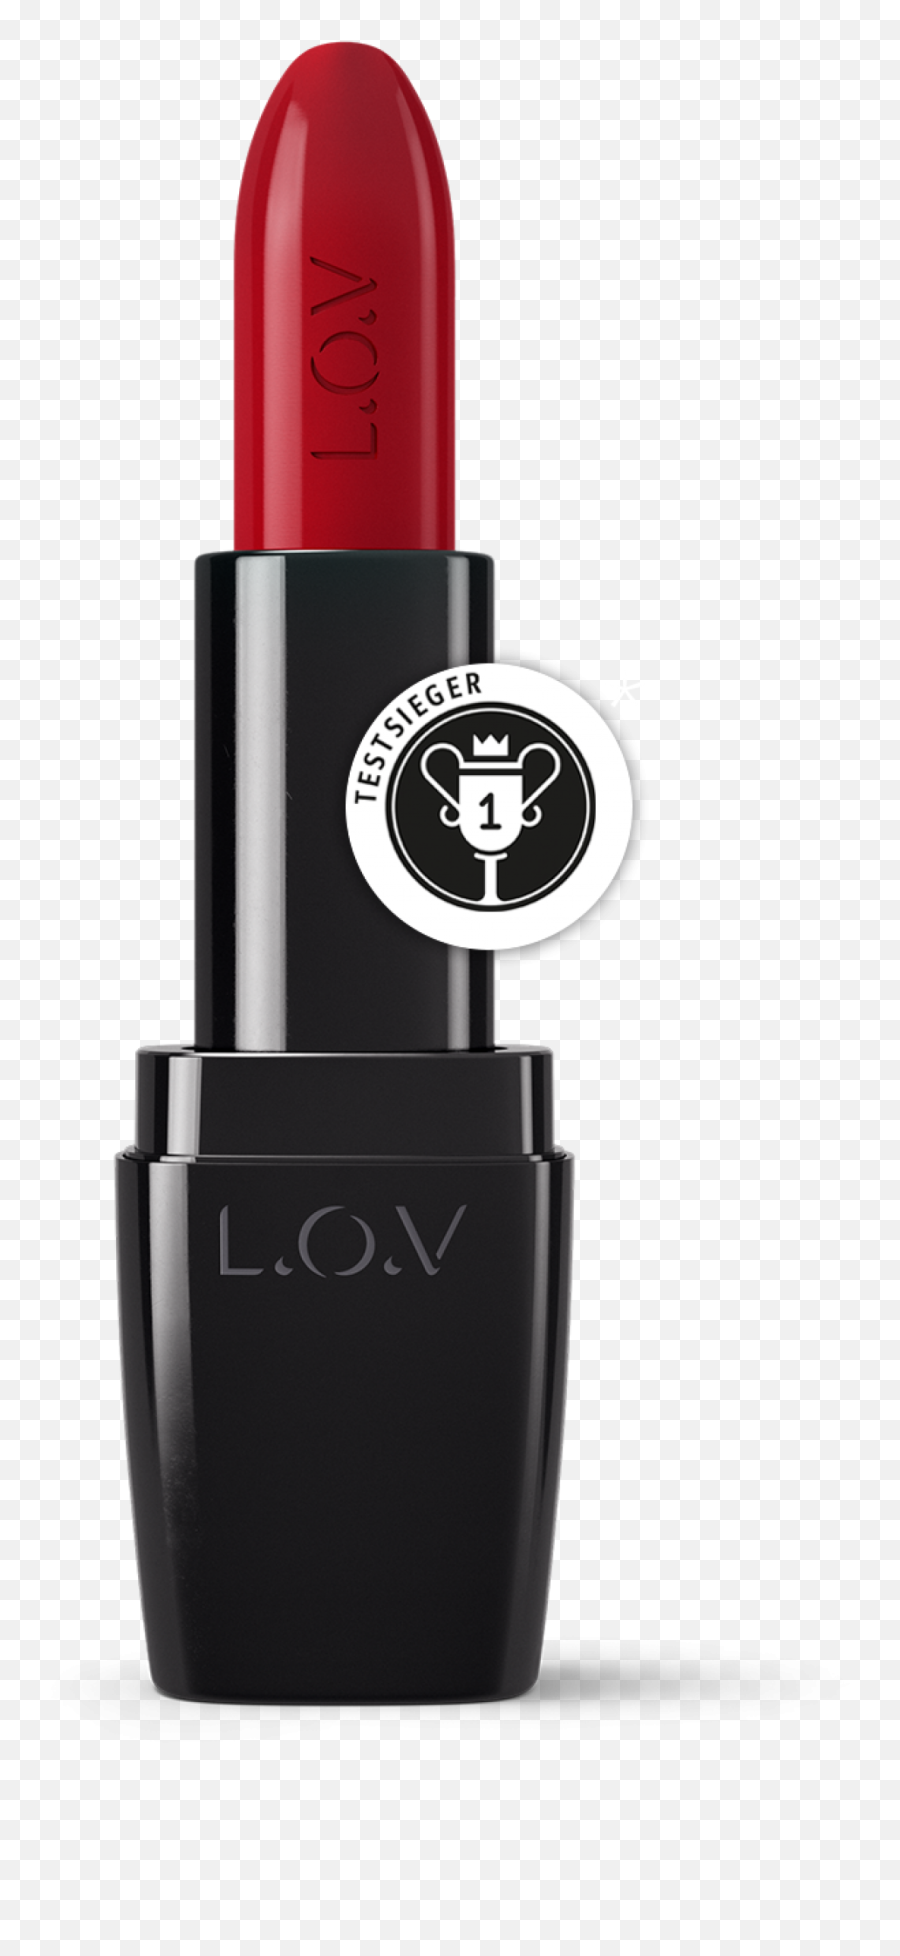 Red Lipstick Png Transparent Image Free 3 - Free,Red Lipstick Png